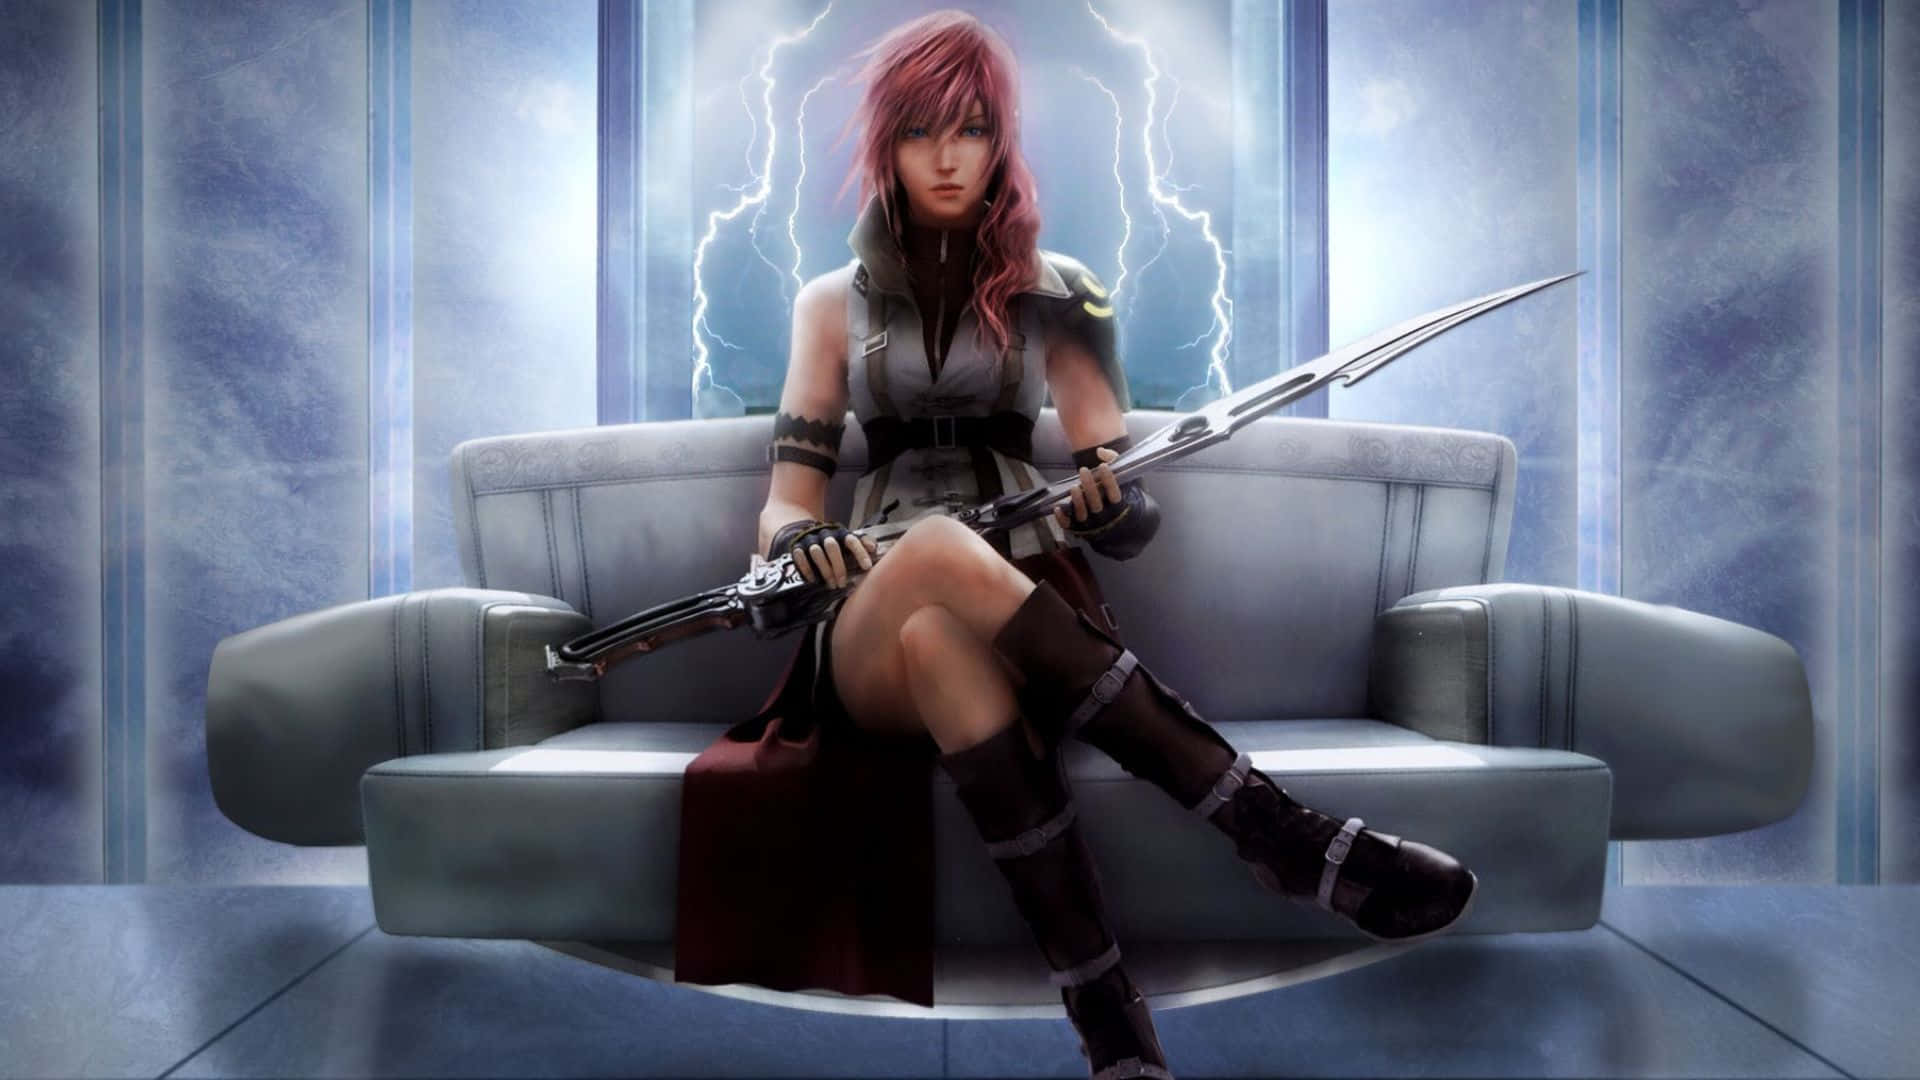 Heroine Lightning From Final Fantasy Xiii In A Dramatic Pose Wallpaper